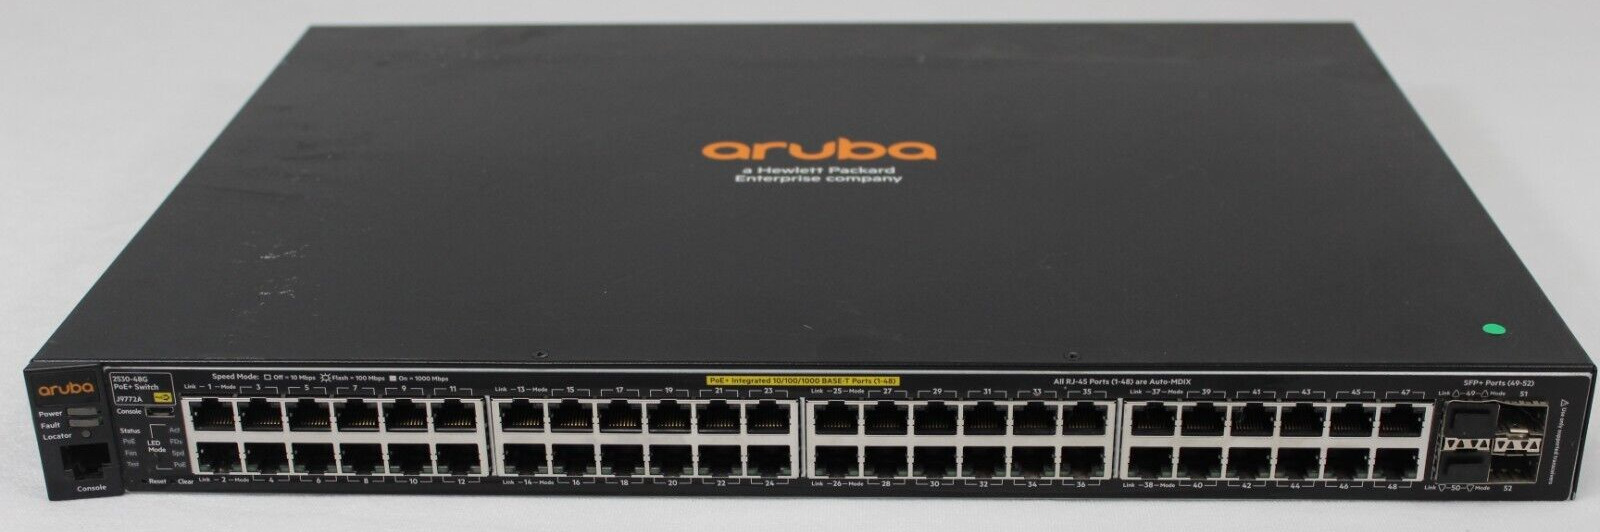 HPE Aruba 2530-48G PoE+ 48-Port Managed Networking Switch J9772A TESTED